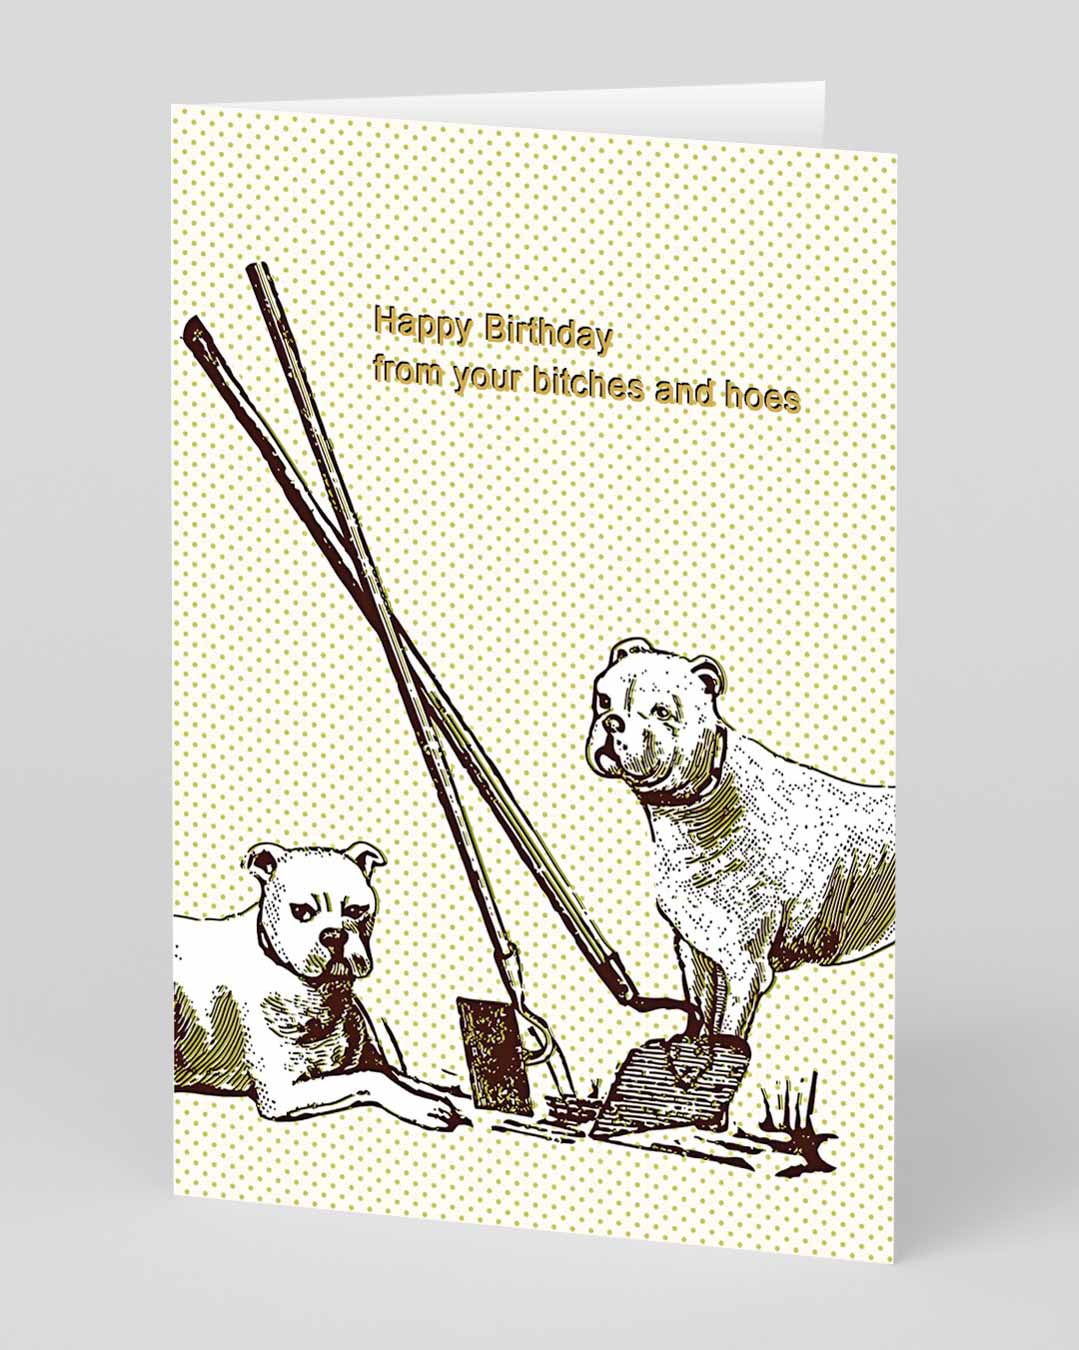 Rude Birthday Card Bitches and Hoes Birthday Card